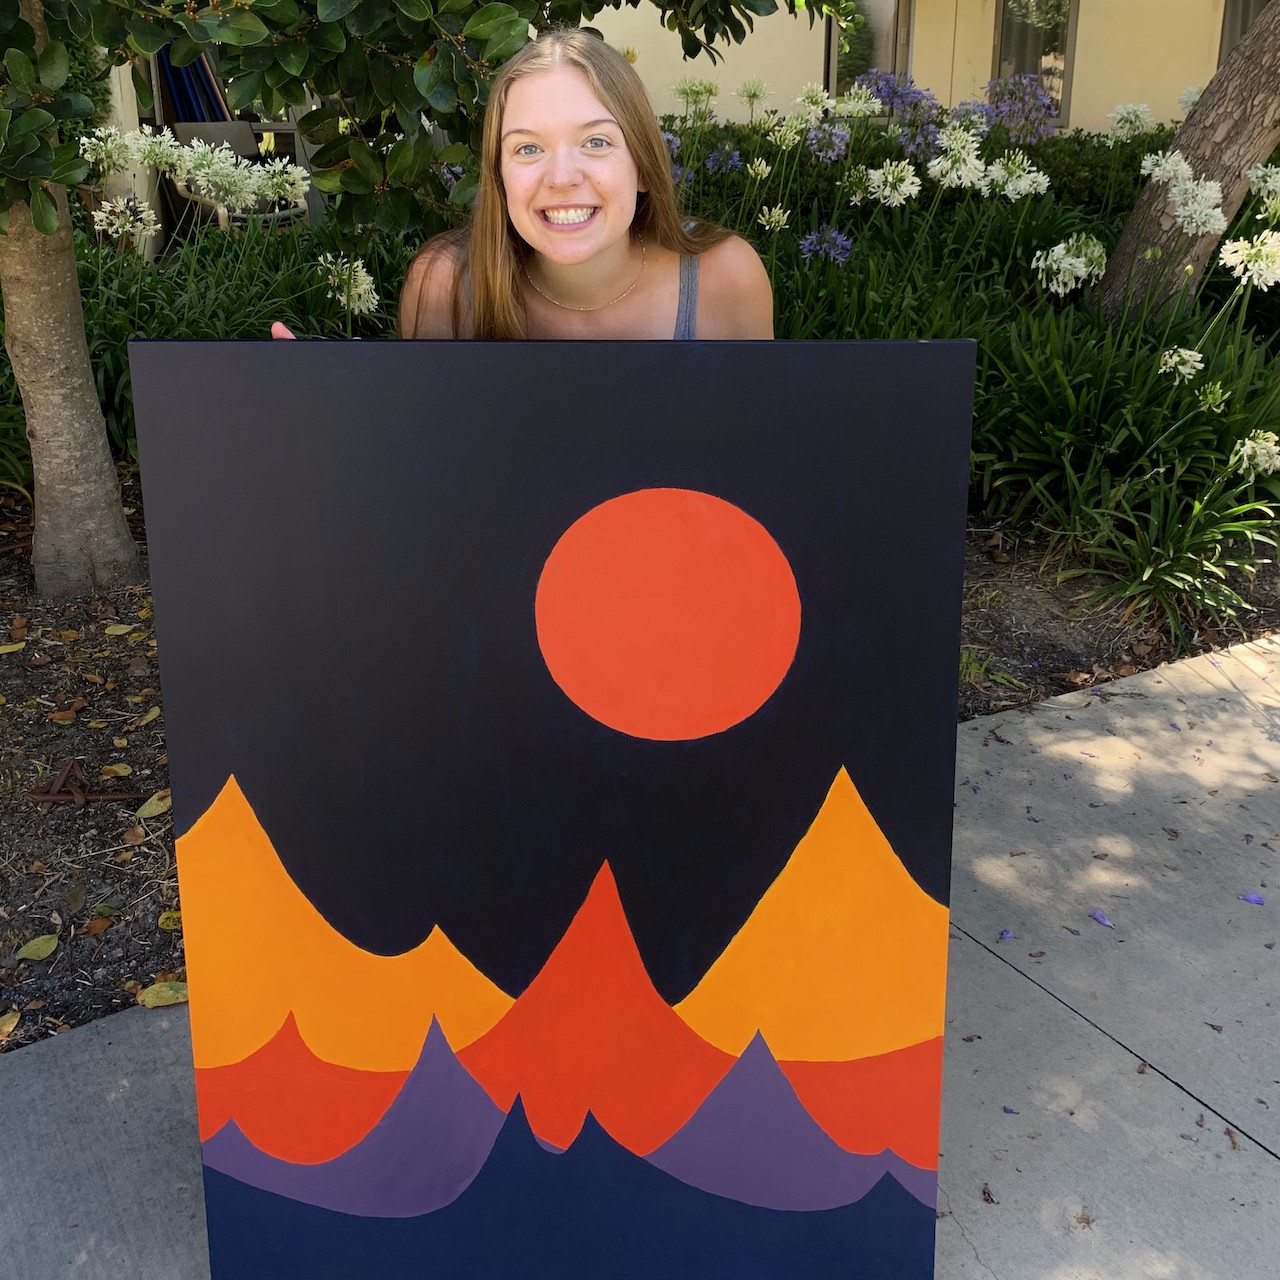 Elke holding up a large colorful painting of mountains.